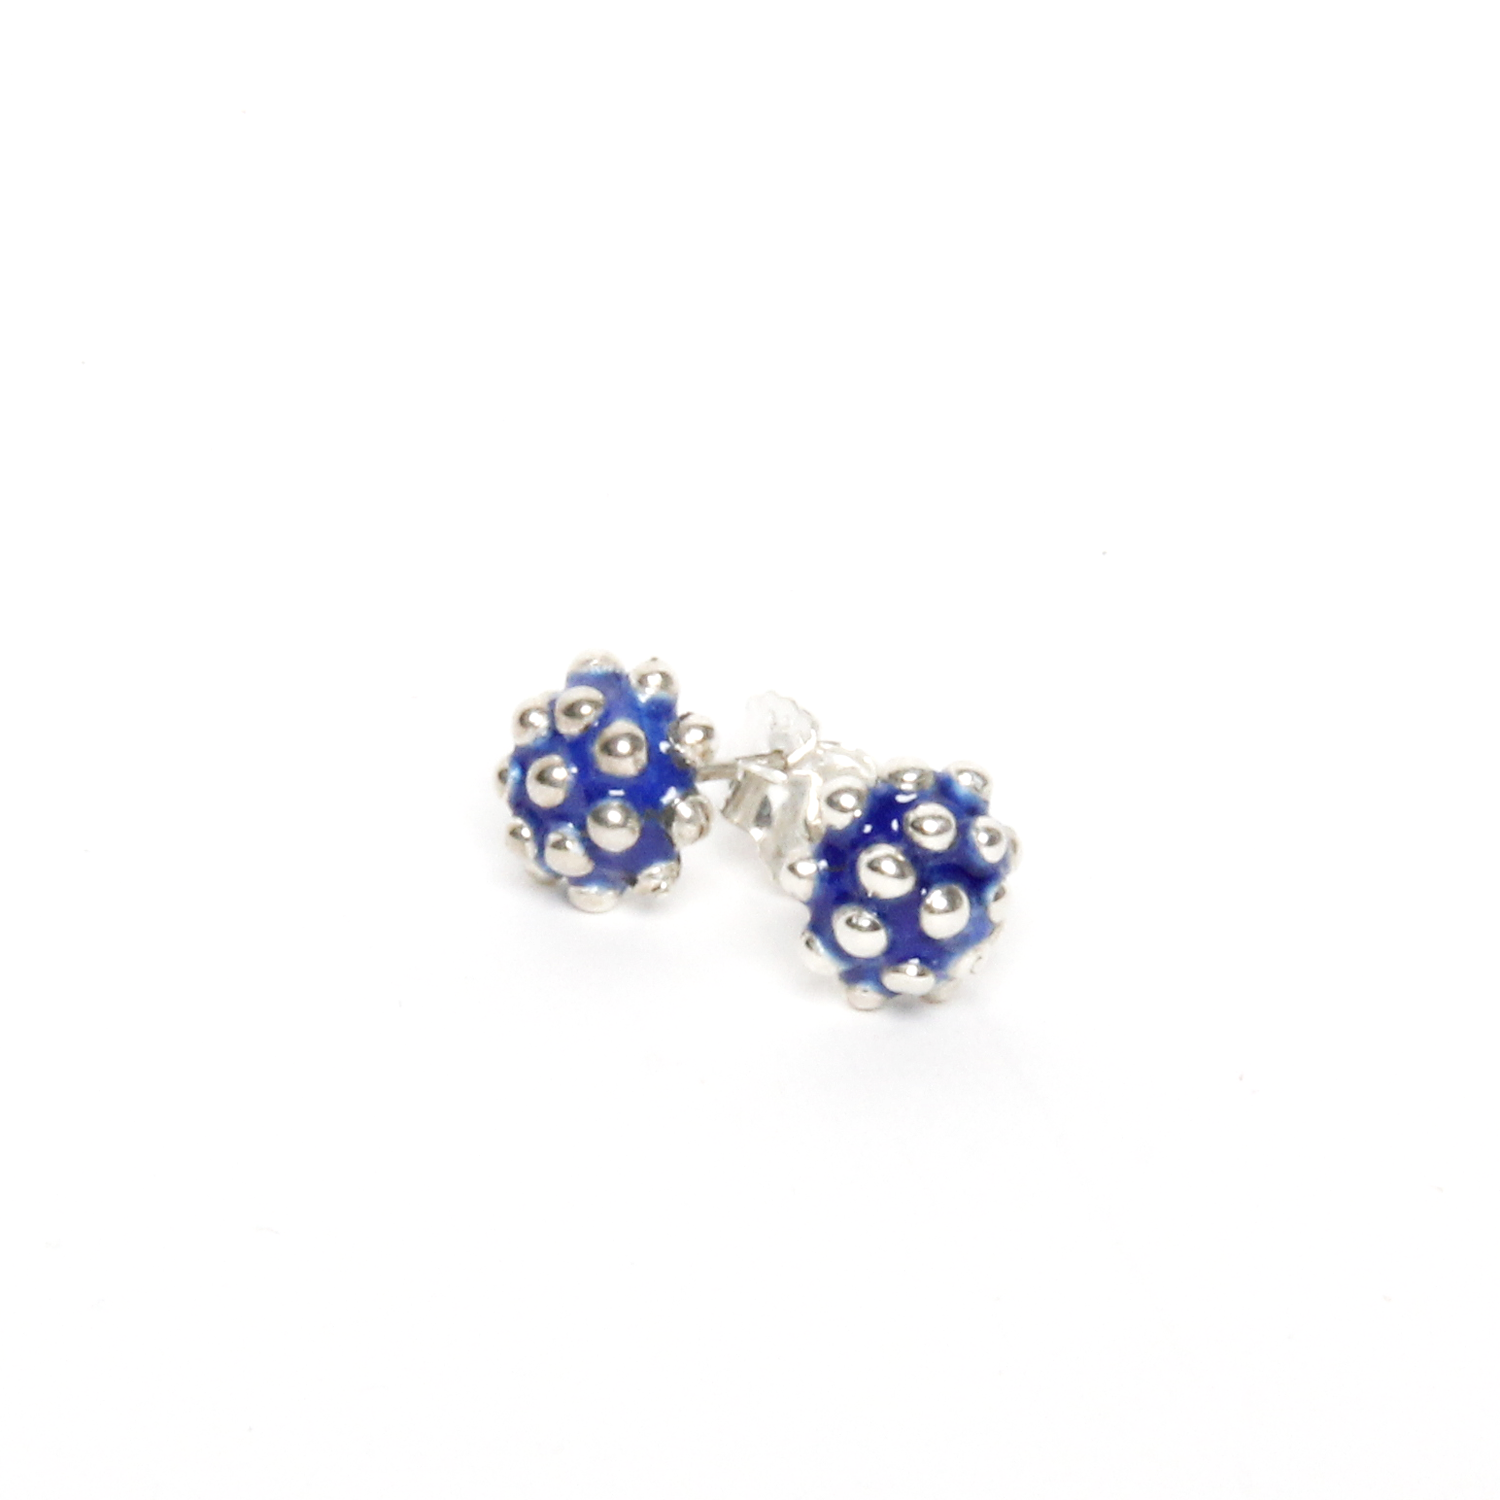 Cinelli Maillet: Mini Blowfish Earrings in Nitric Product Image 1 of 2